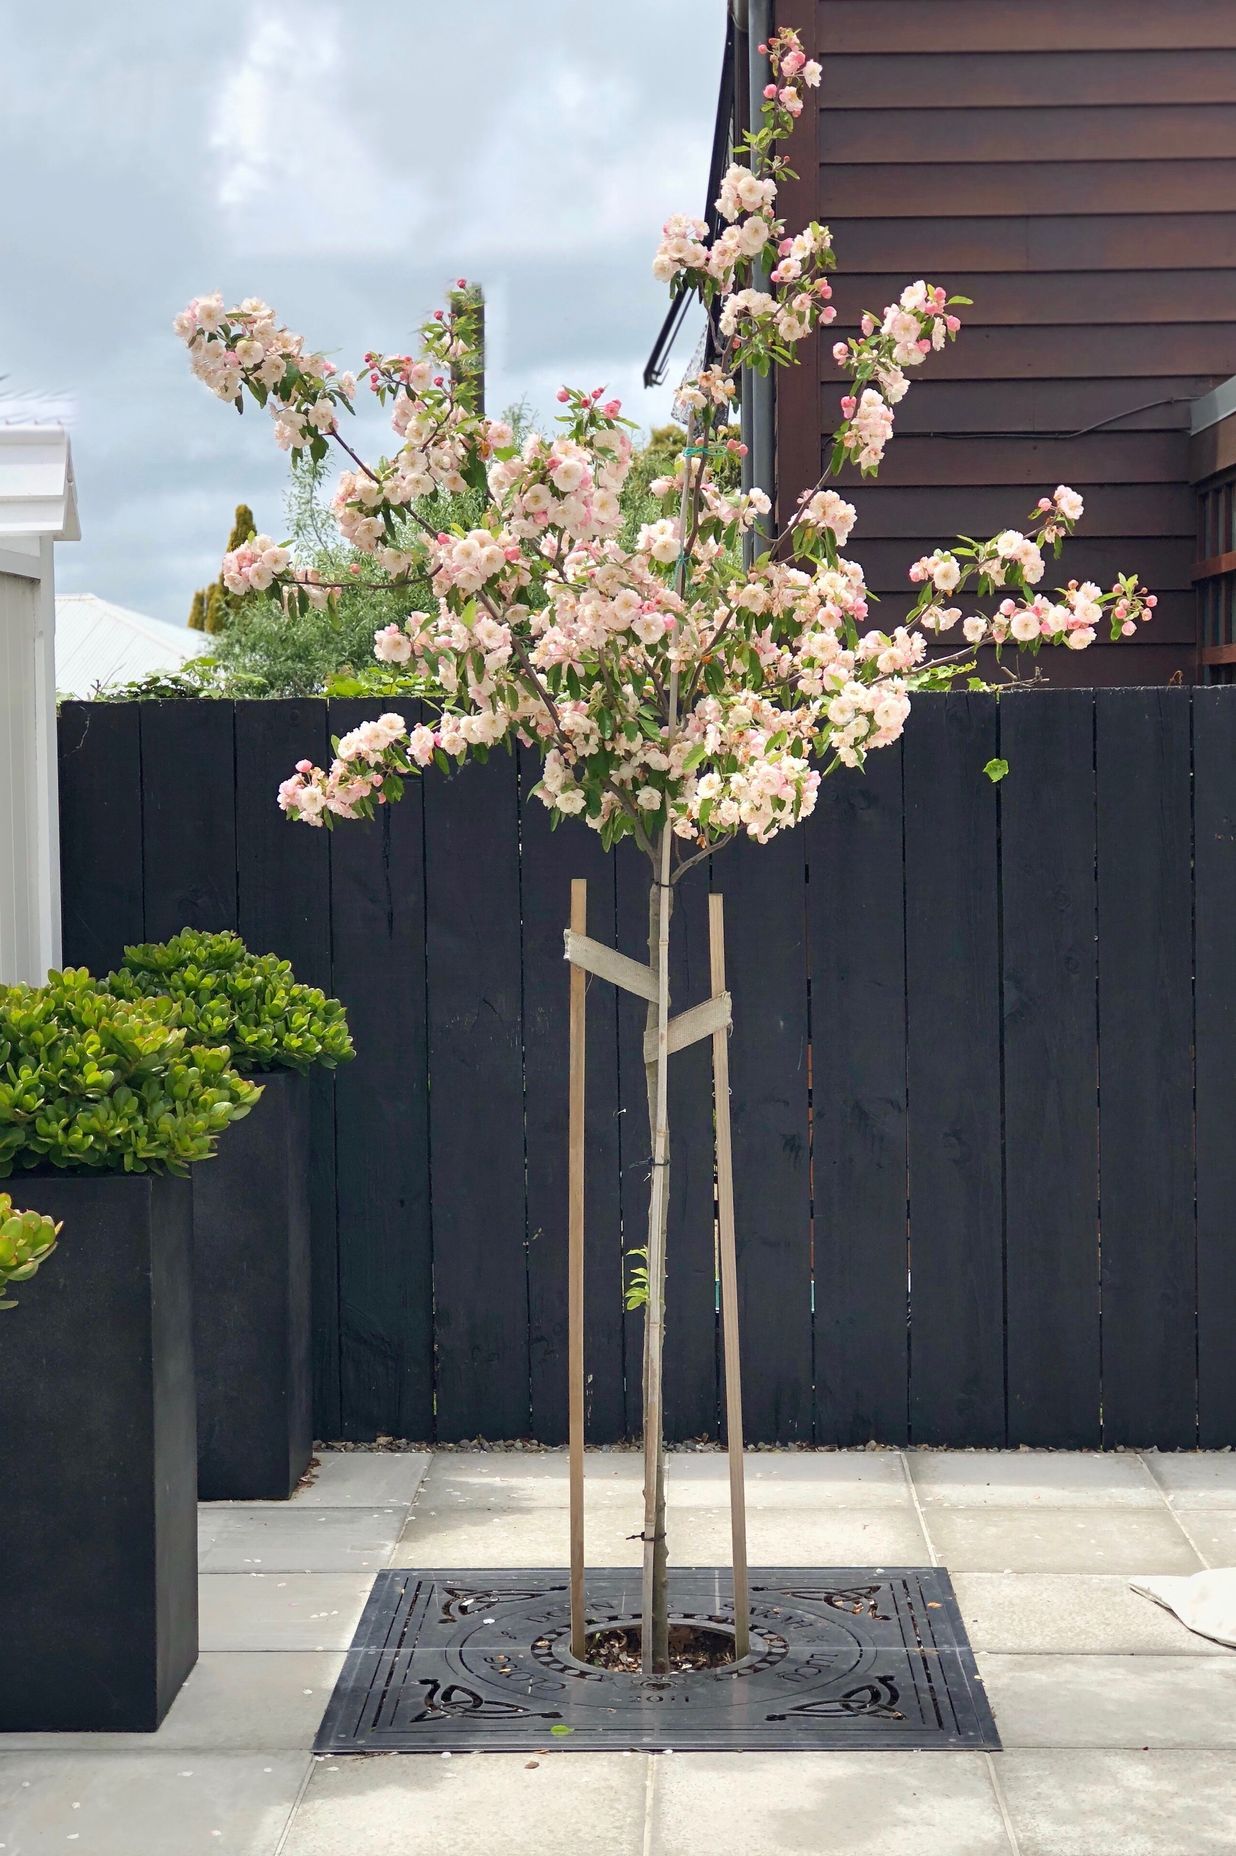 Speciment crabapple with customised stainless steel laser cut tree grate